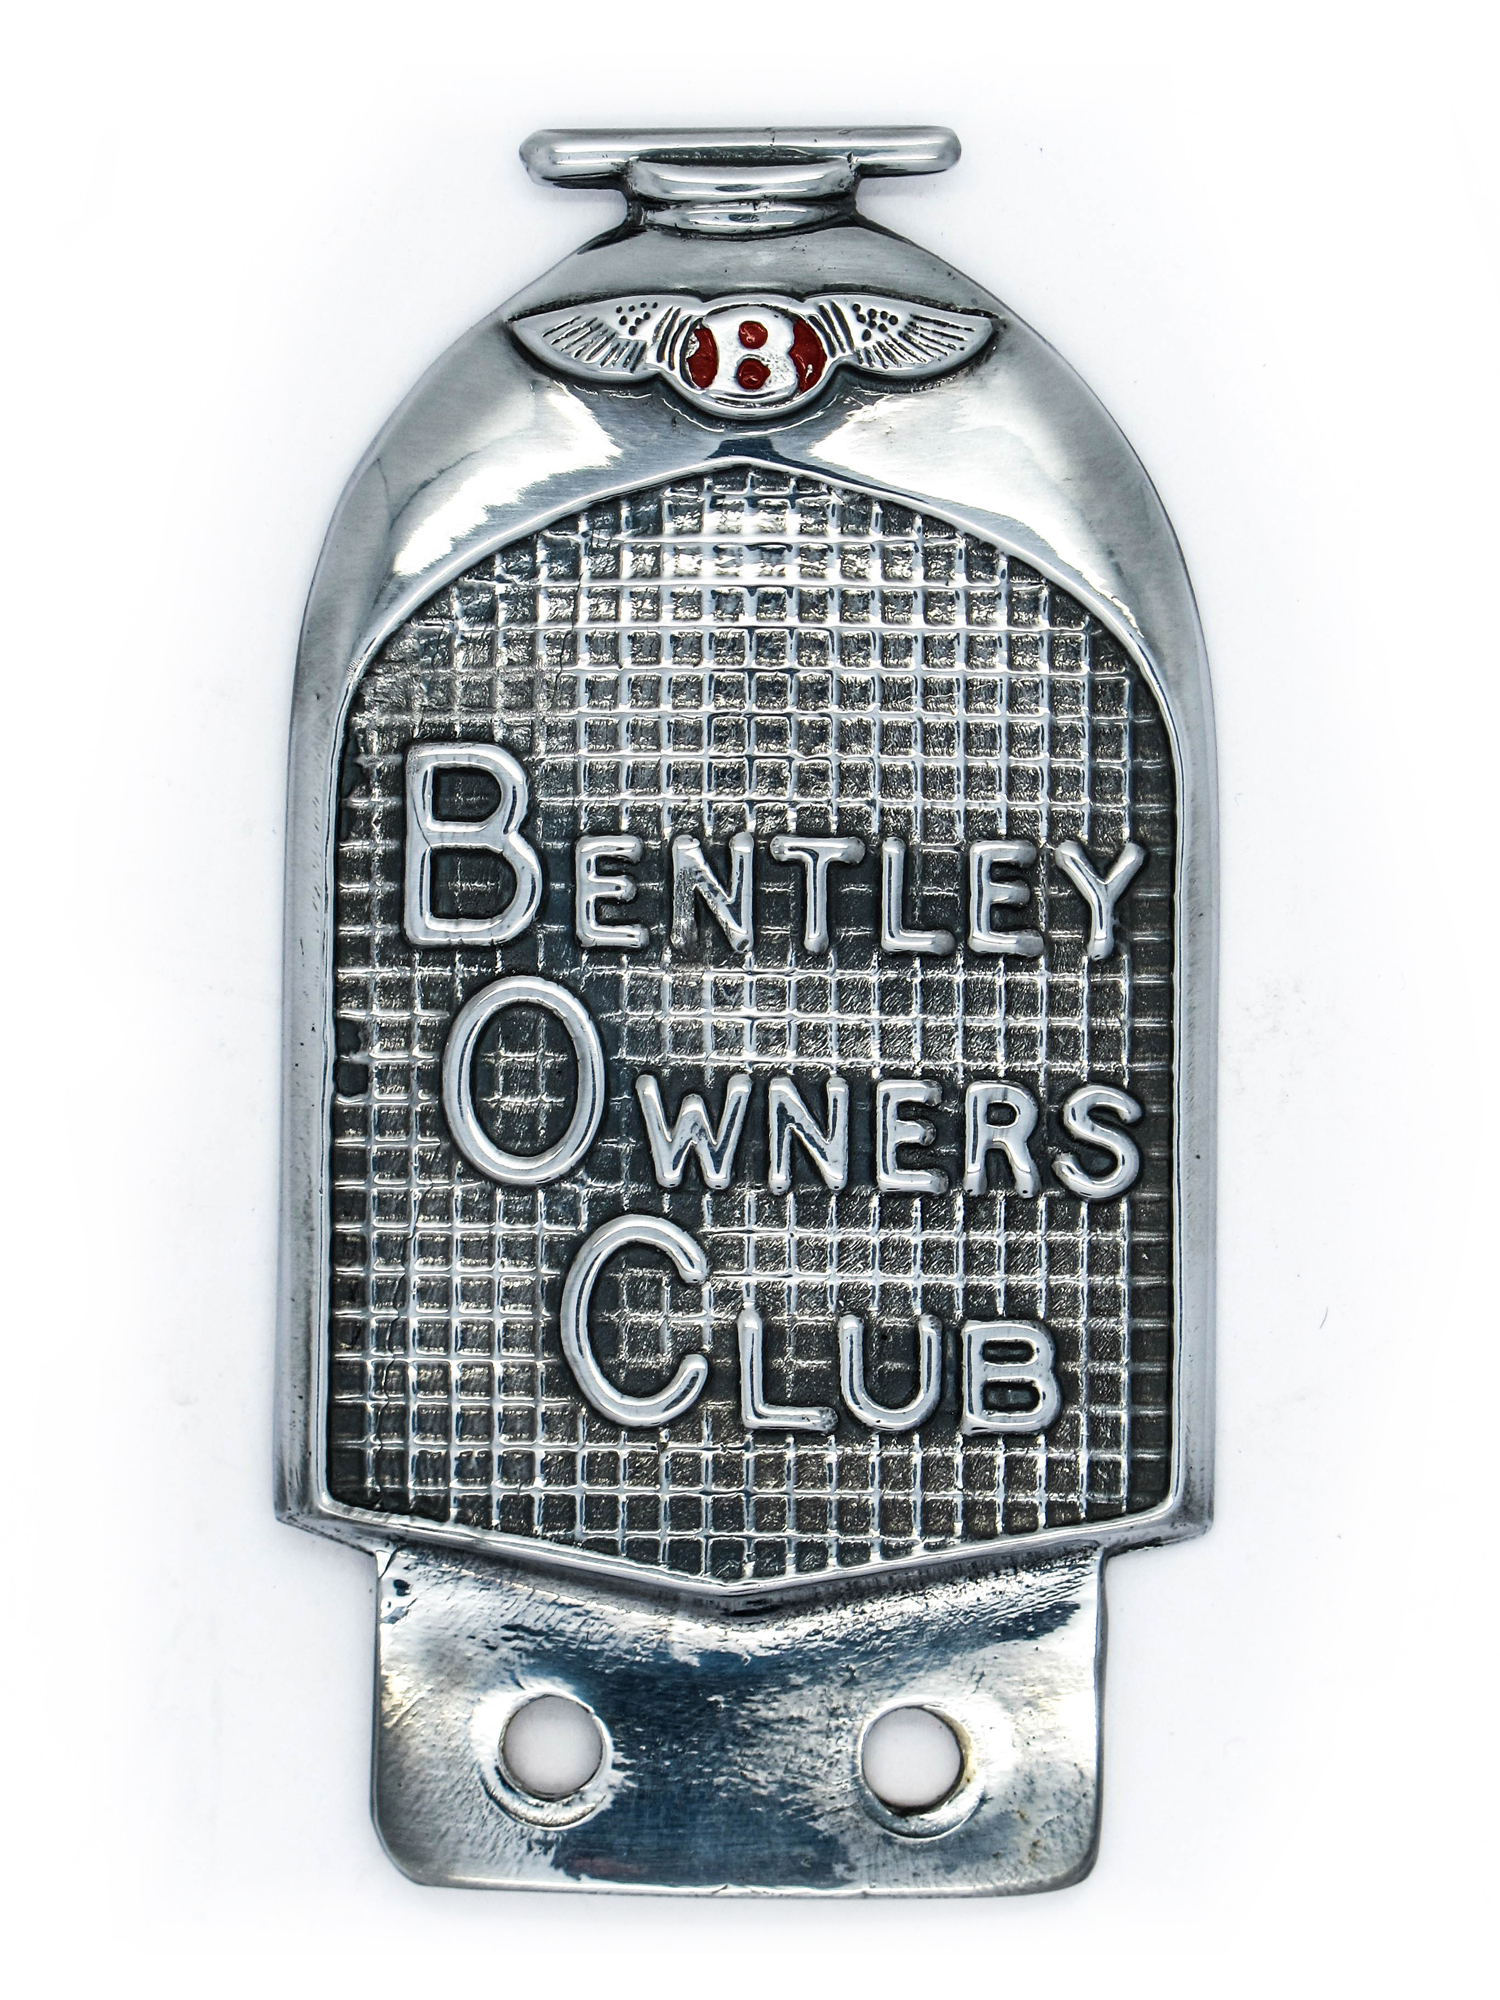 A 1930's Red Label Bentley Owner's Club Chrome Bumper Badge, plated bronze, circa 4.5" x 2.5".